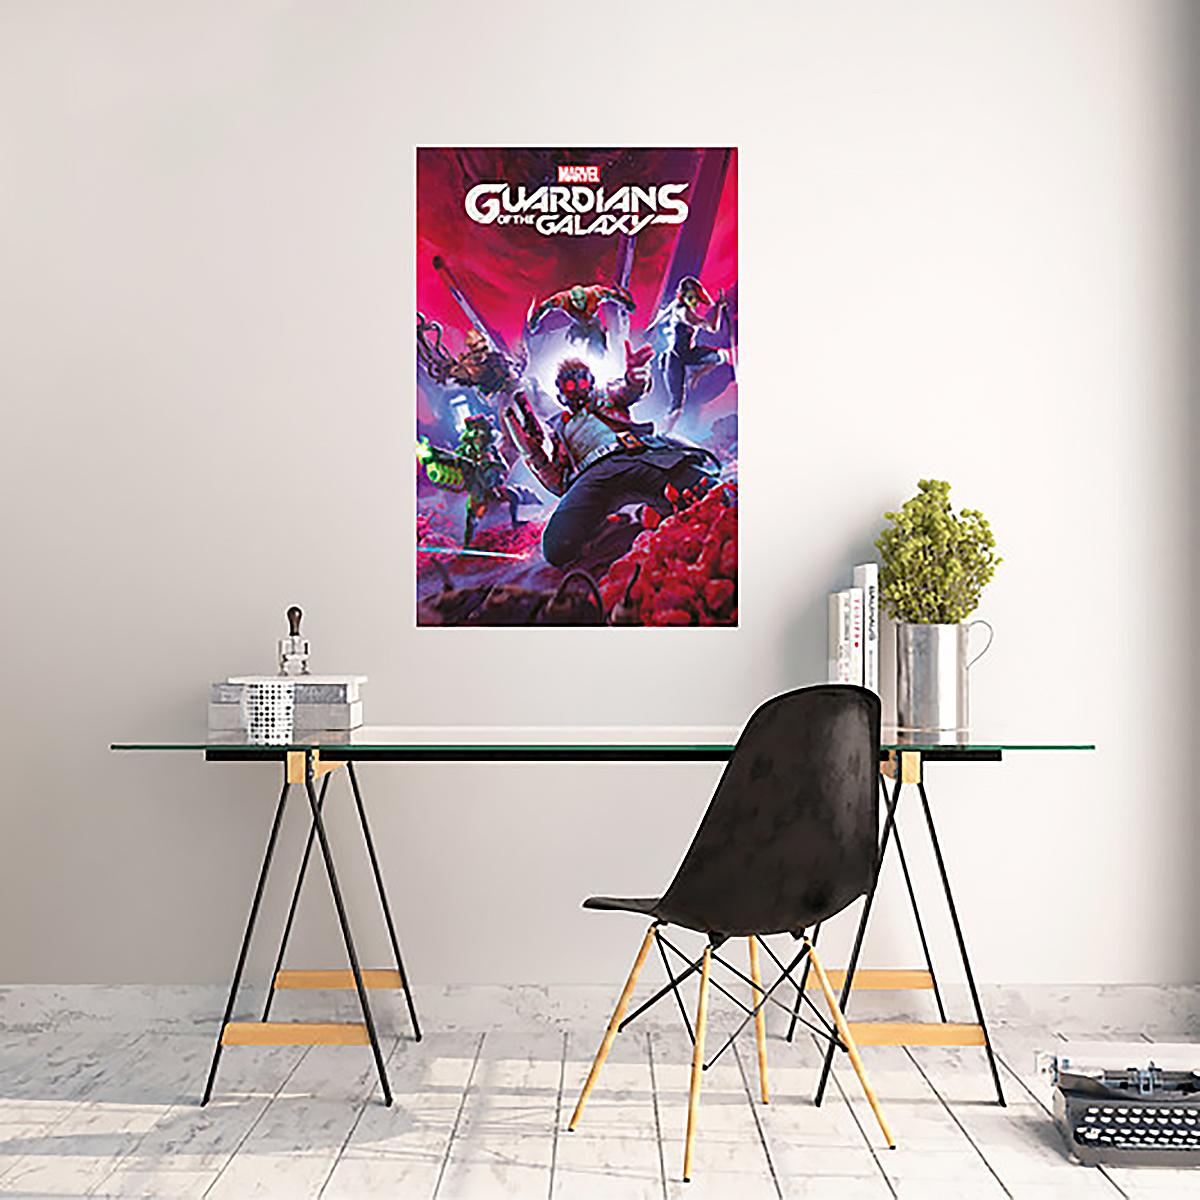 Videospiel Poster ERIK the of GRUPO Galaxy EDITORES Cover Poster Guardians